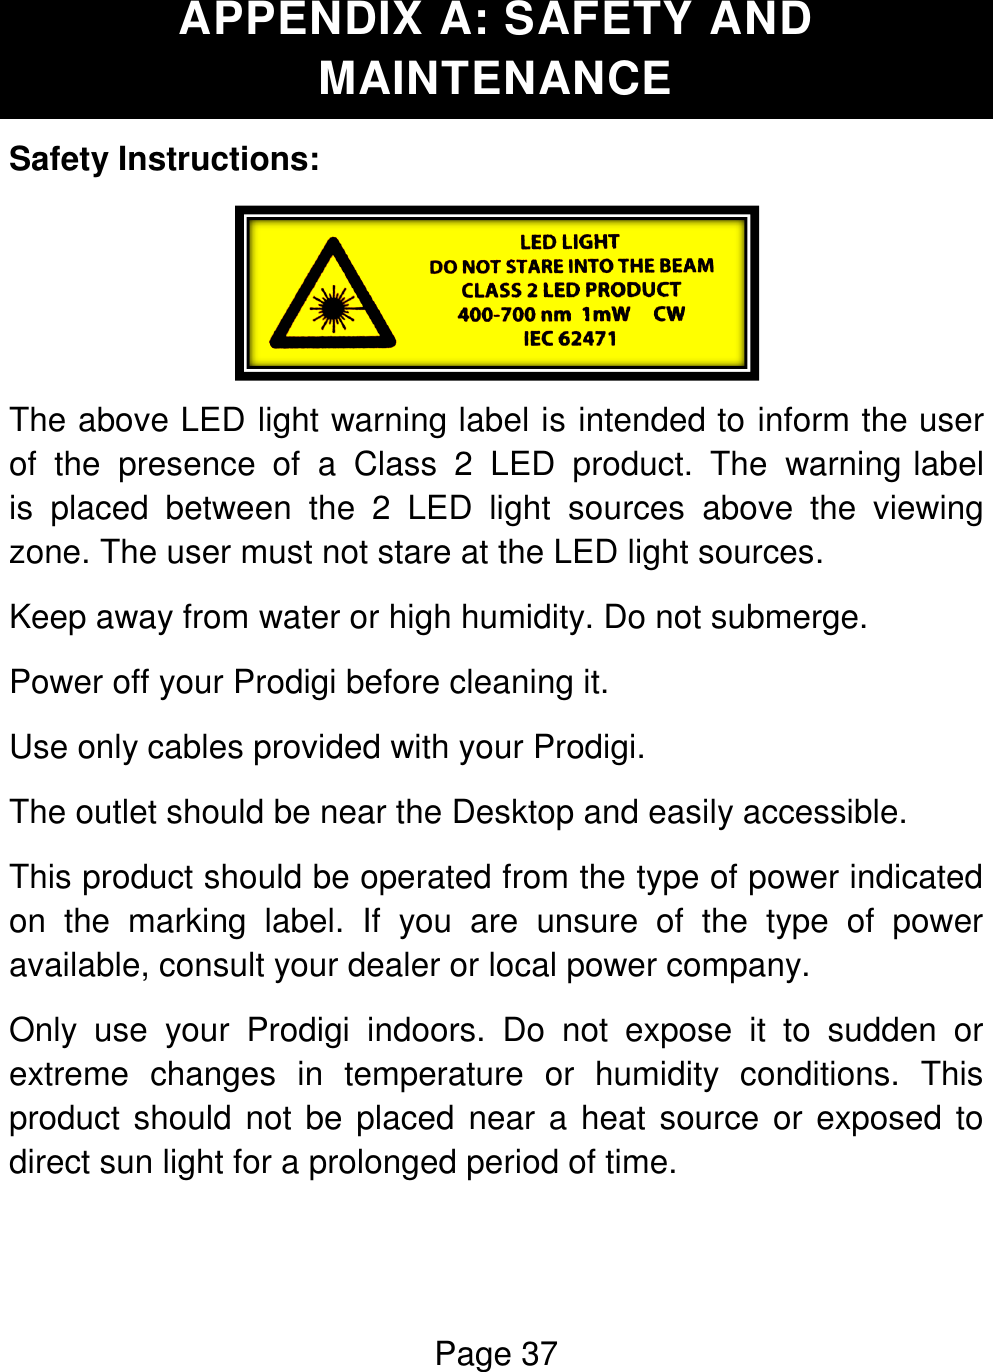 Page 37  APPENDIX A: SAFETY AND MAINTENANCE Safety Instructions:  The above LED light warning label is intended to inform the user of the  presence  of  a  Class  2  LED  product.  The  warning label is  placed  between  the  2  LED  light  sources  above  the  viewing zone. The user must not stare at the LED light sources. Keep away from water or high humidity. Do not submerge. Power off your Prodigi before cleaning it. Use only cables provided with your Prodigi.  The outlet should be near the Desktop and easily accessible. This product should be operated from the type of power indicated on  the  marking  label.  If  you  are  unsure  of  the  type  of  power available, consult your dealer or local power company. Only  use  your  Prodigi  indoors.  Do  not  expose  it  to  sudden  or extreme  changes  in  temperature  or  humidity  conditions.  This product should not be placed near a heat source or exposed to direct sun light for a prolonged period of time.  